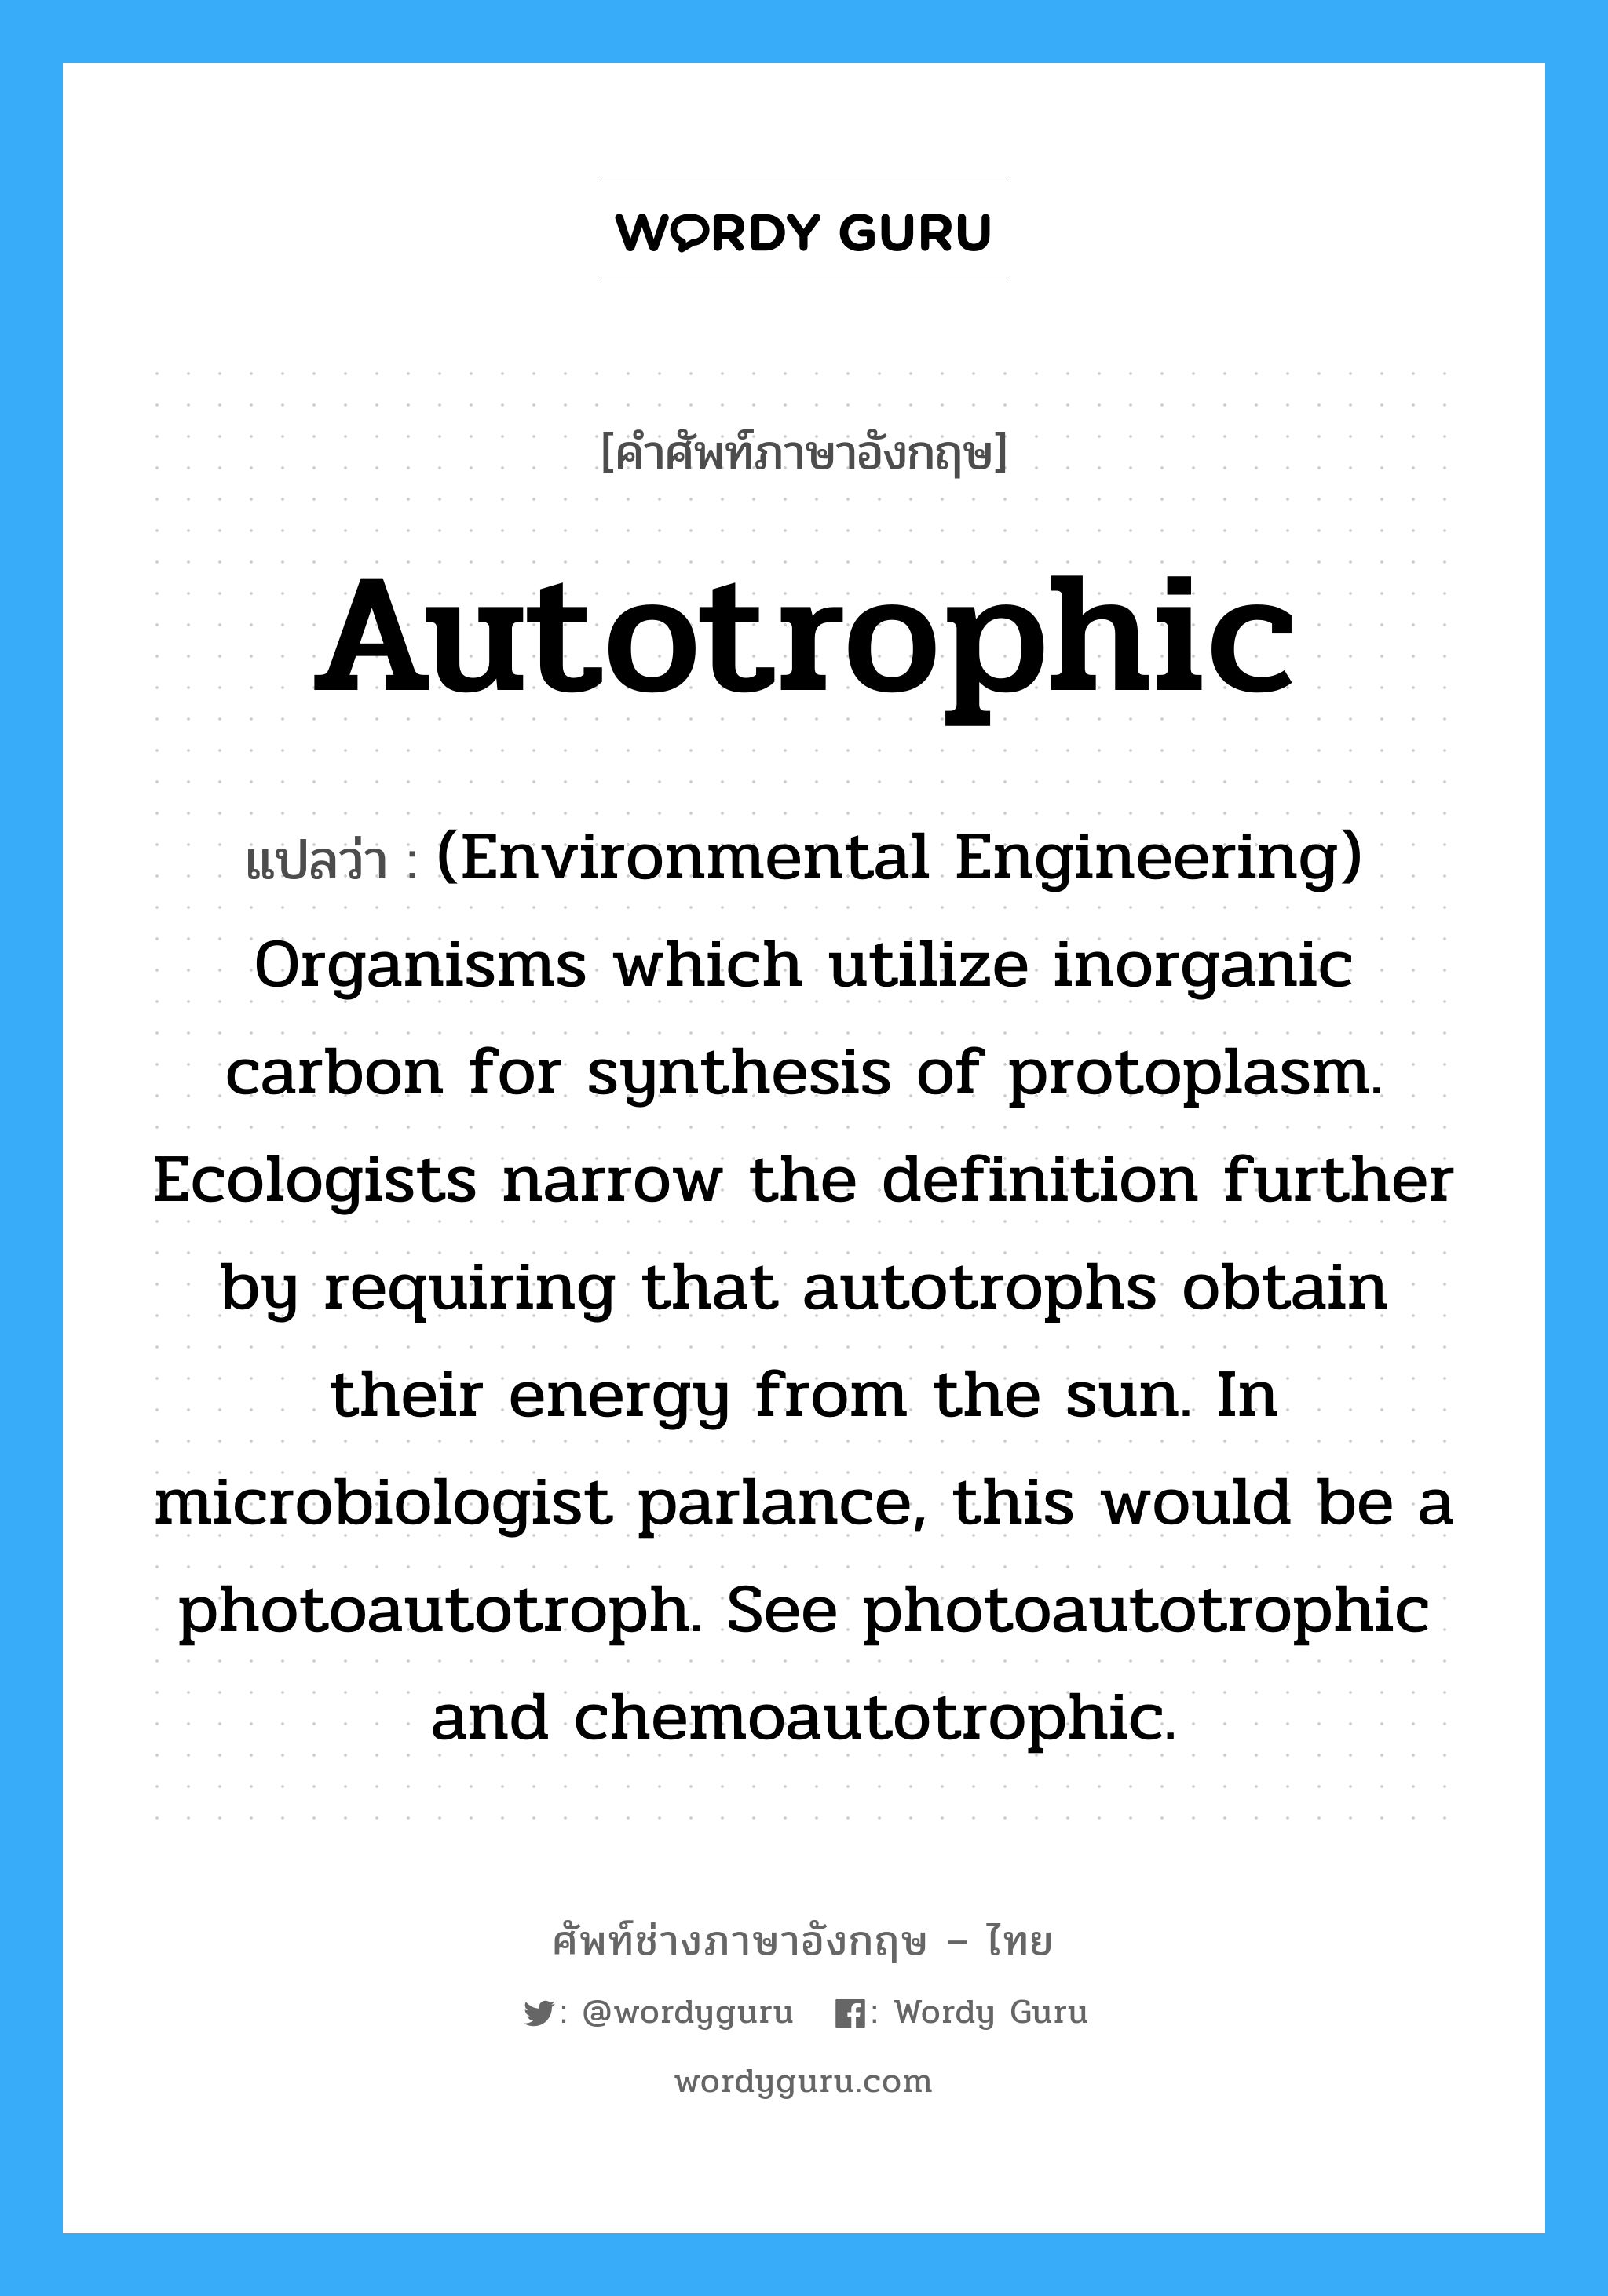 (Environmental Engineering) Organisms which utilize inorganic carbon dioxide for protoplasm synthesis and light for an energy source. See autotrophic and chemoautotrophic. ภาษาอังกฤษ?, คำศัพท์ช่างภาษาอังกฤษ - ไทย (Environmental Engineering) Organisms which utilize inorganic carbon for synthesis of protoplasm. Ecologists narrow the definition further by requiring that autotrophs obtain their energy from the sun. In microbiologist parlance, this would be a photoautotroph. See photoautotrophic and chemoautotrophic. คำศัพท์ภาษาอังกฤษ (Environmental Engineering) Organisms which utilize inorganic carbon for synthesis of protoplasm. Ecologists narrow the definition further by requiring that autotrophs obtain their energy from the sun. In microbiologist parlance, this would be a photoautotroph. See photoautotrophic and chemoautotrophic. แปลว่า Autotrophic